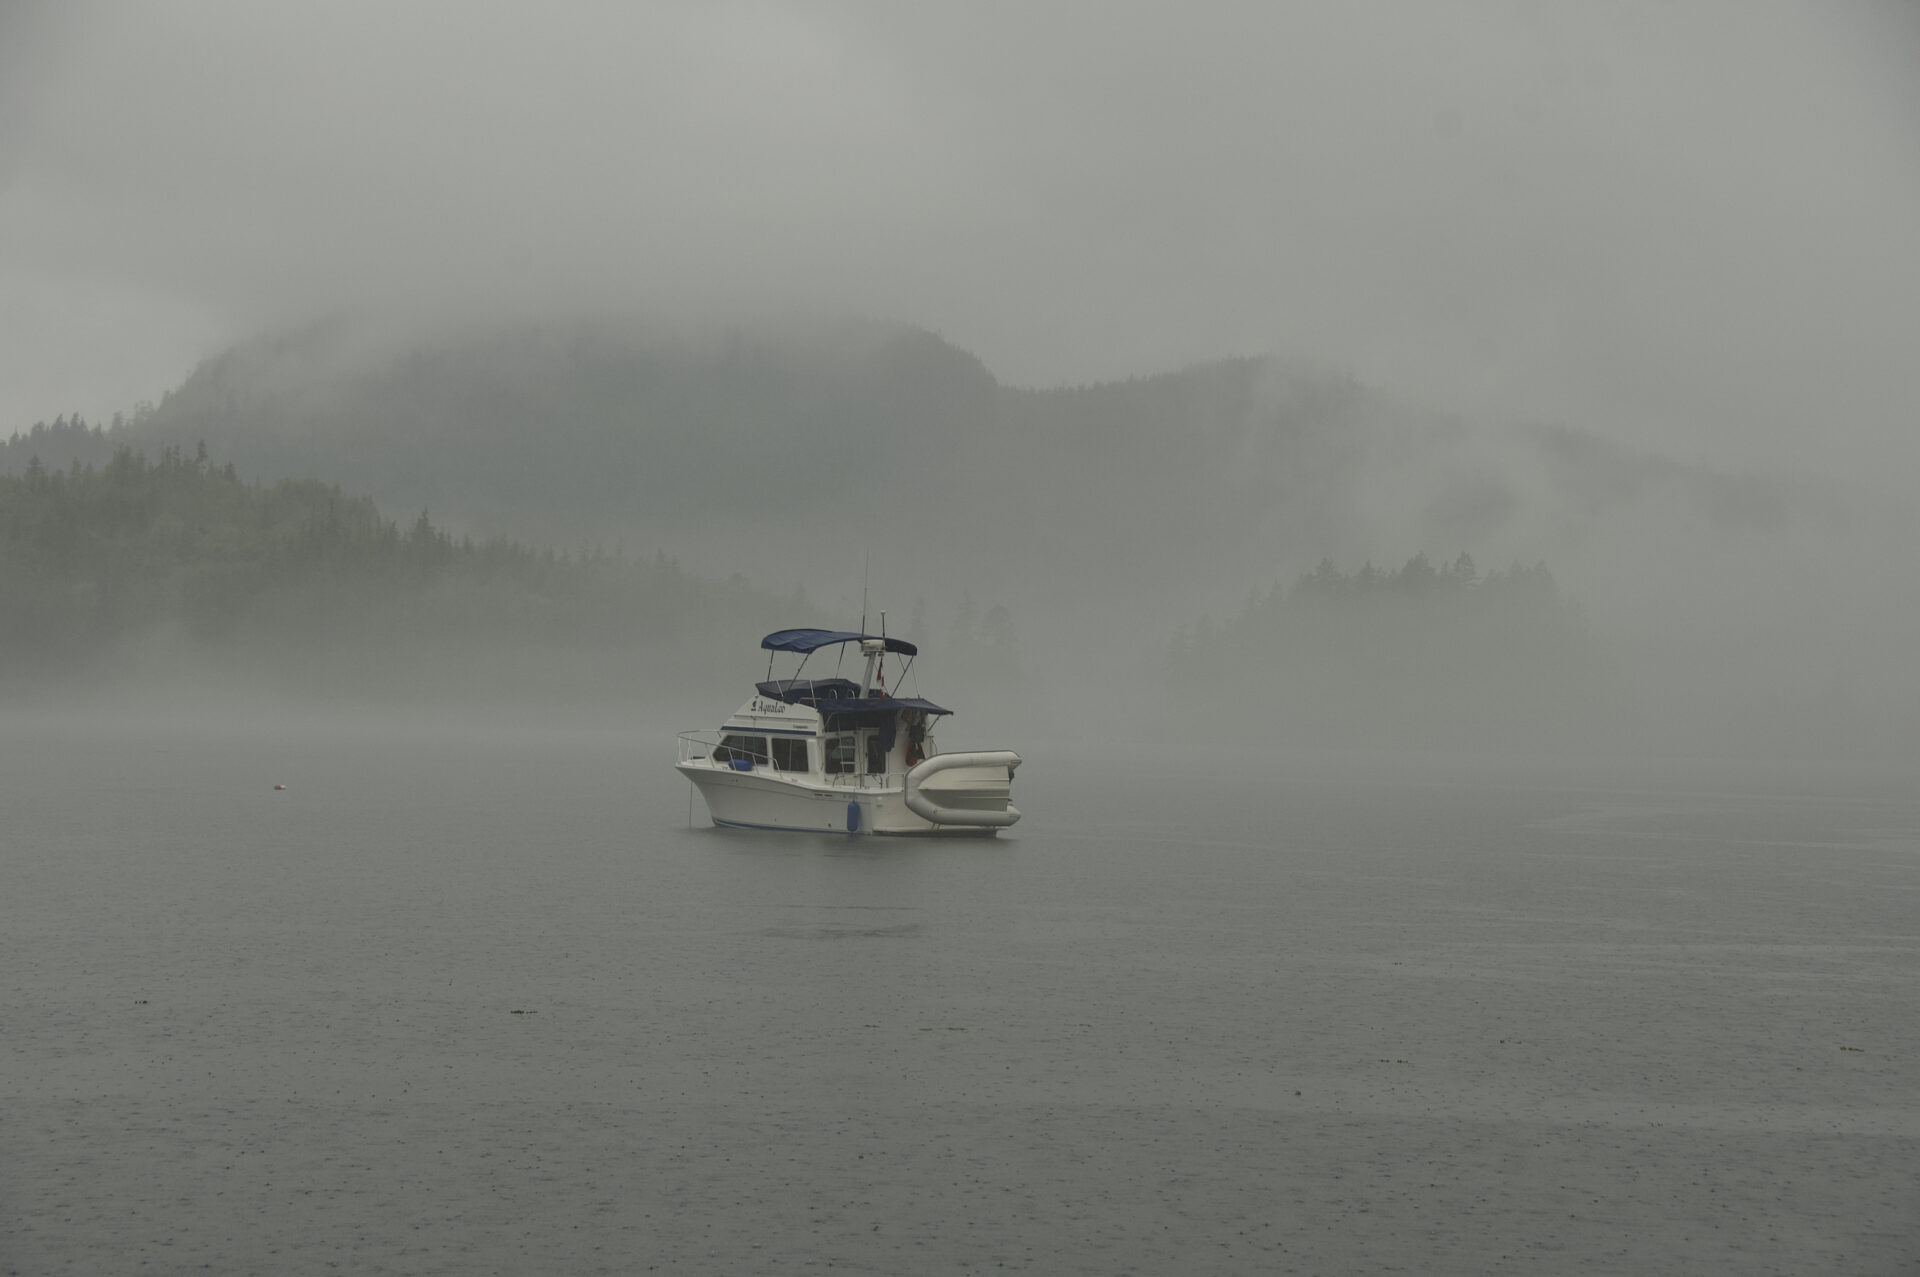 Fog is a regular occurrence during winter cruising